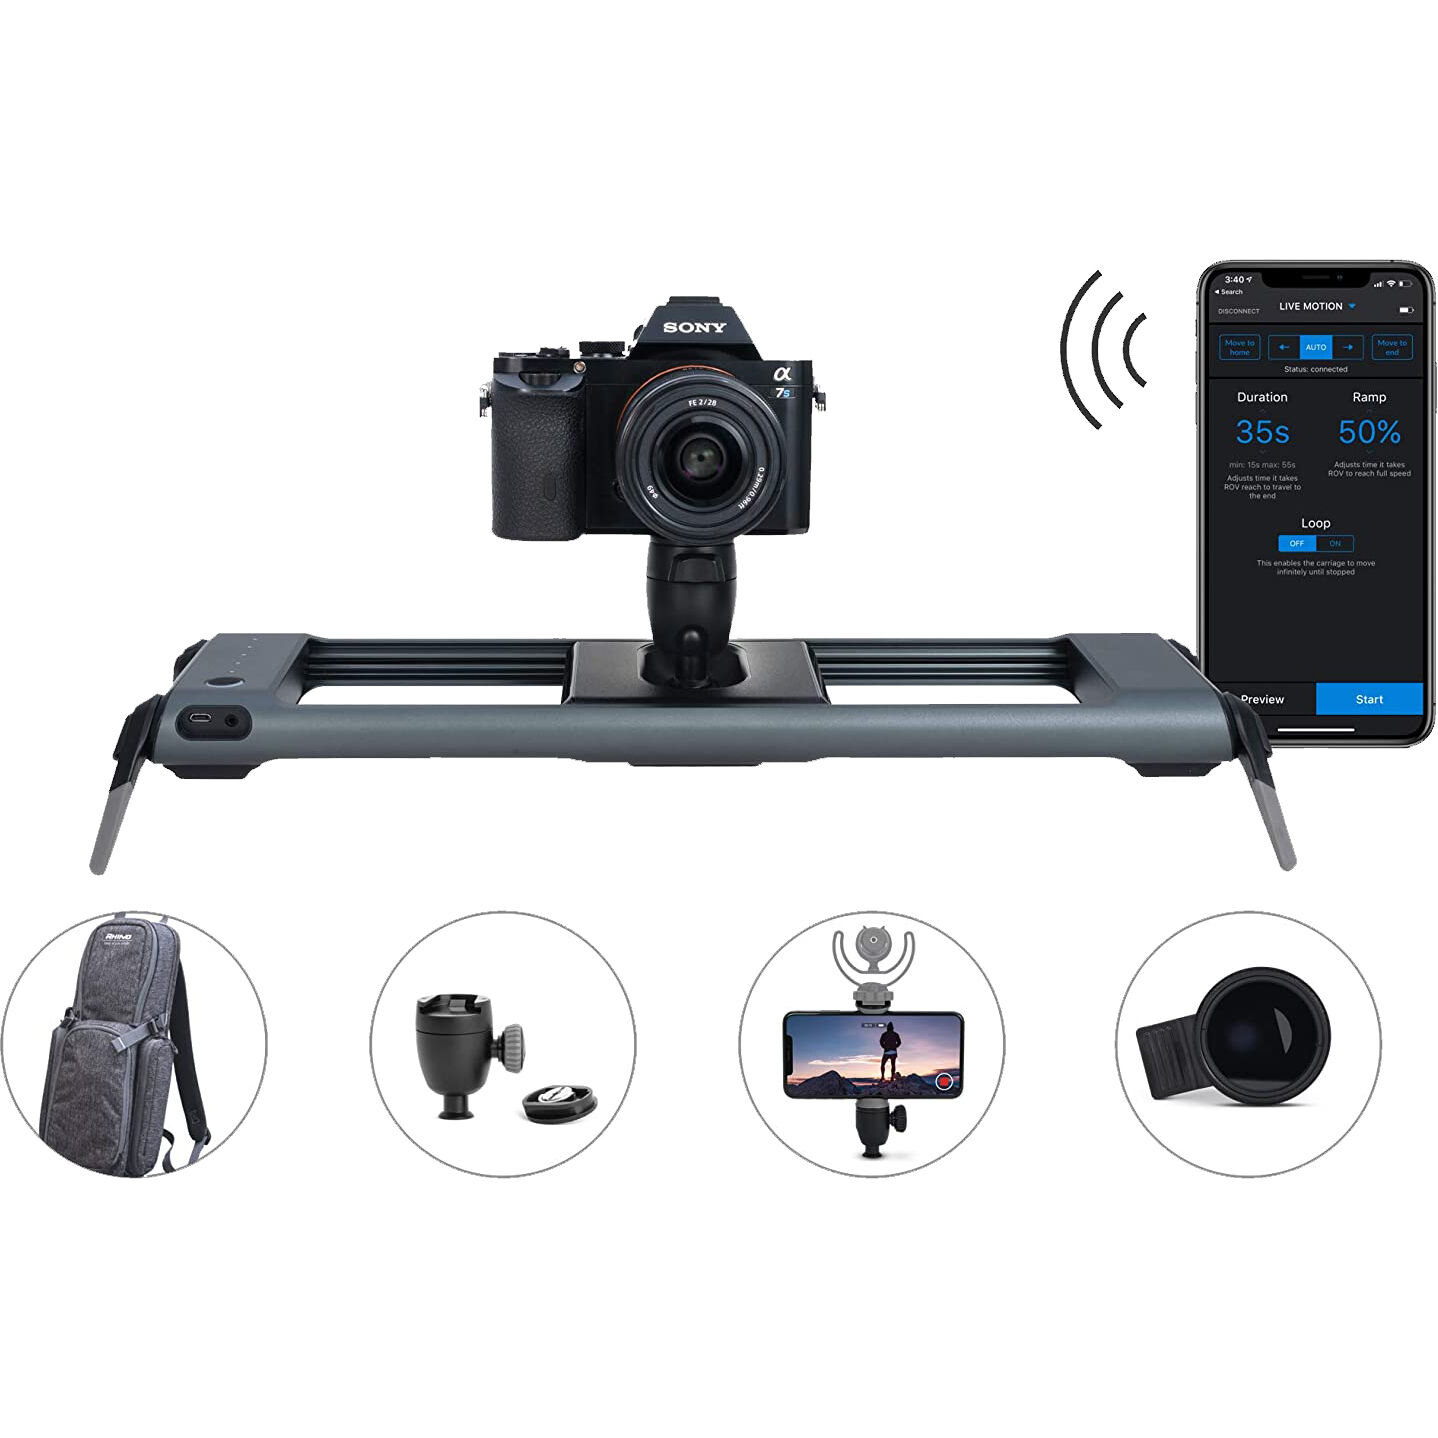 Action Camera Max Support 8kg/13.2 lbs Loading Sutefoto 11.8/30cm Portable Camera Slider Track with 4 Bearing for Video Movie Photography DSL Nikon Canon Pentax Sony Cameras,Phone 